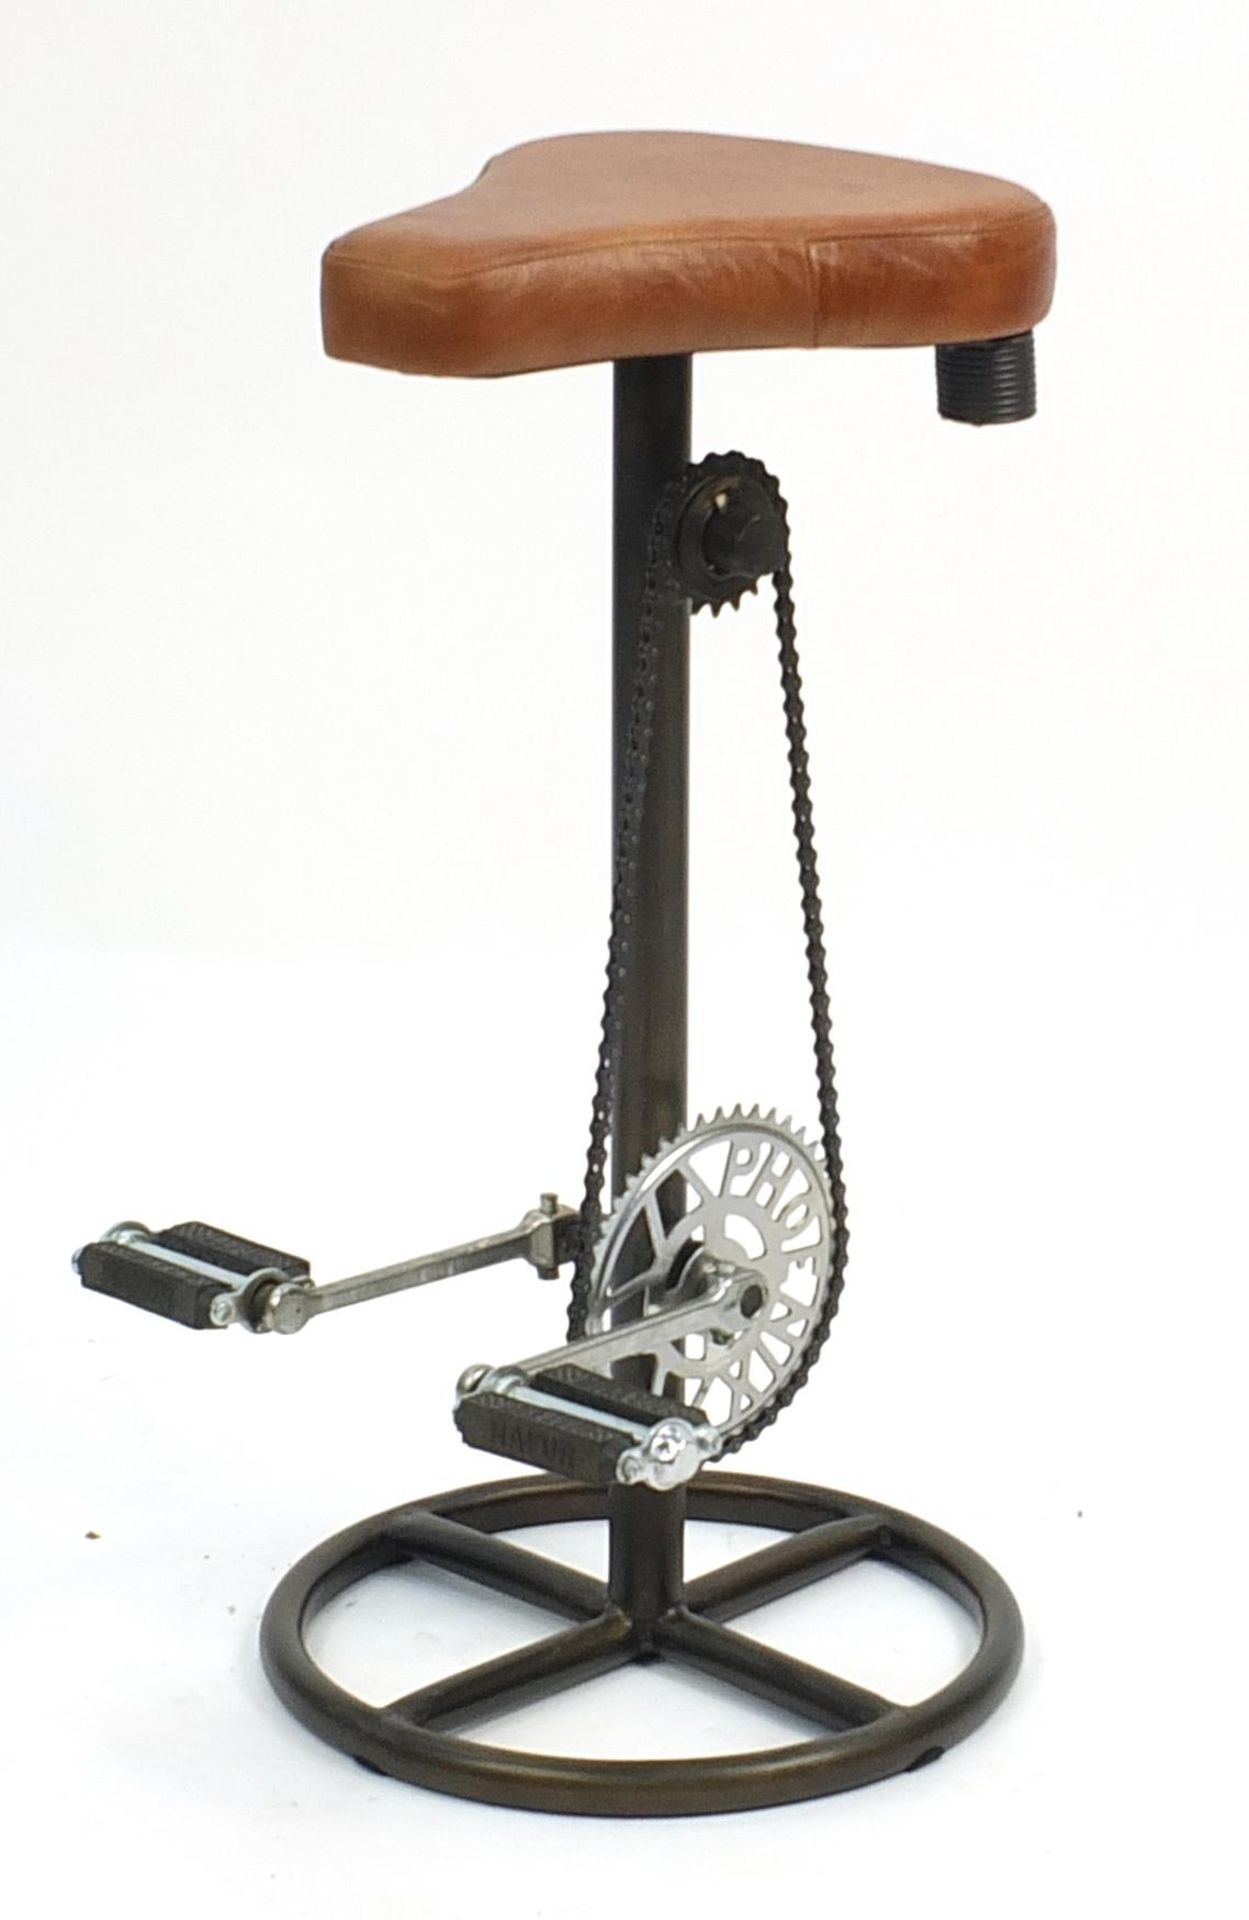 Industrial bar stool with bicycle pedal and chain footrest, 74cm high